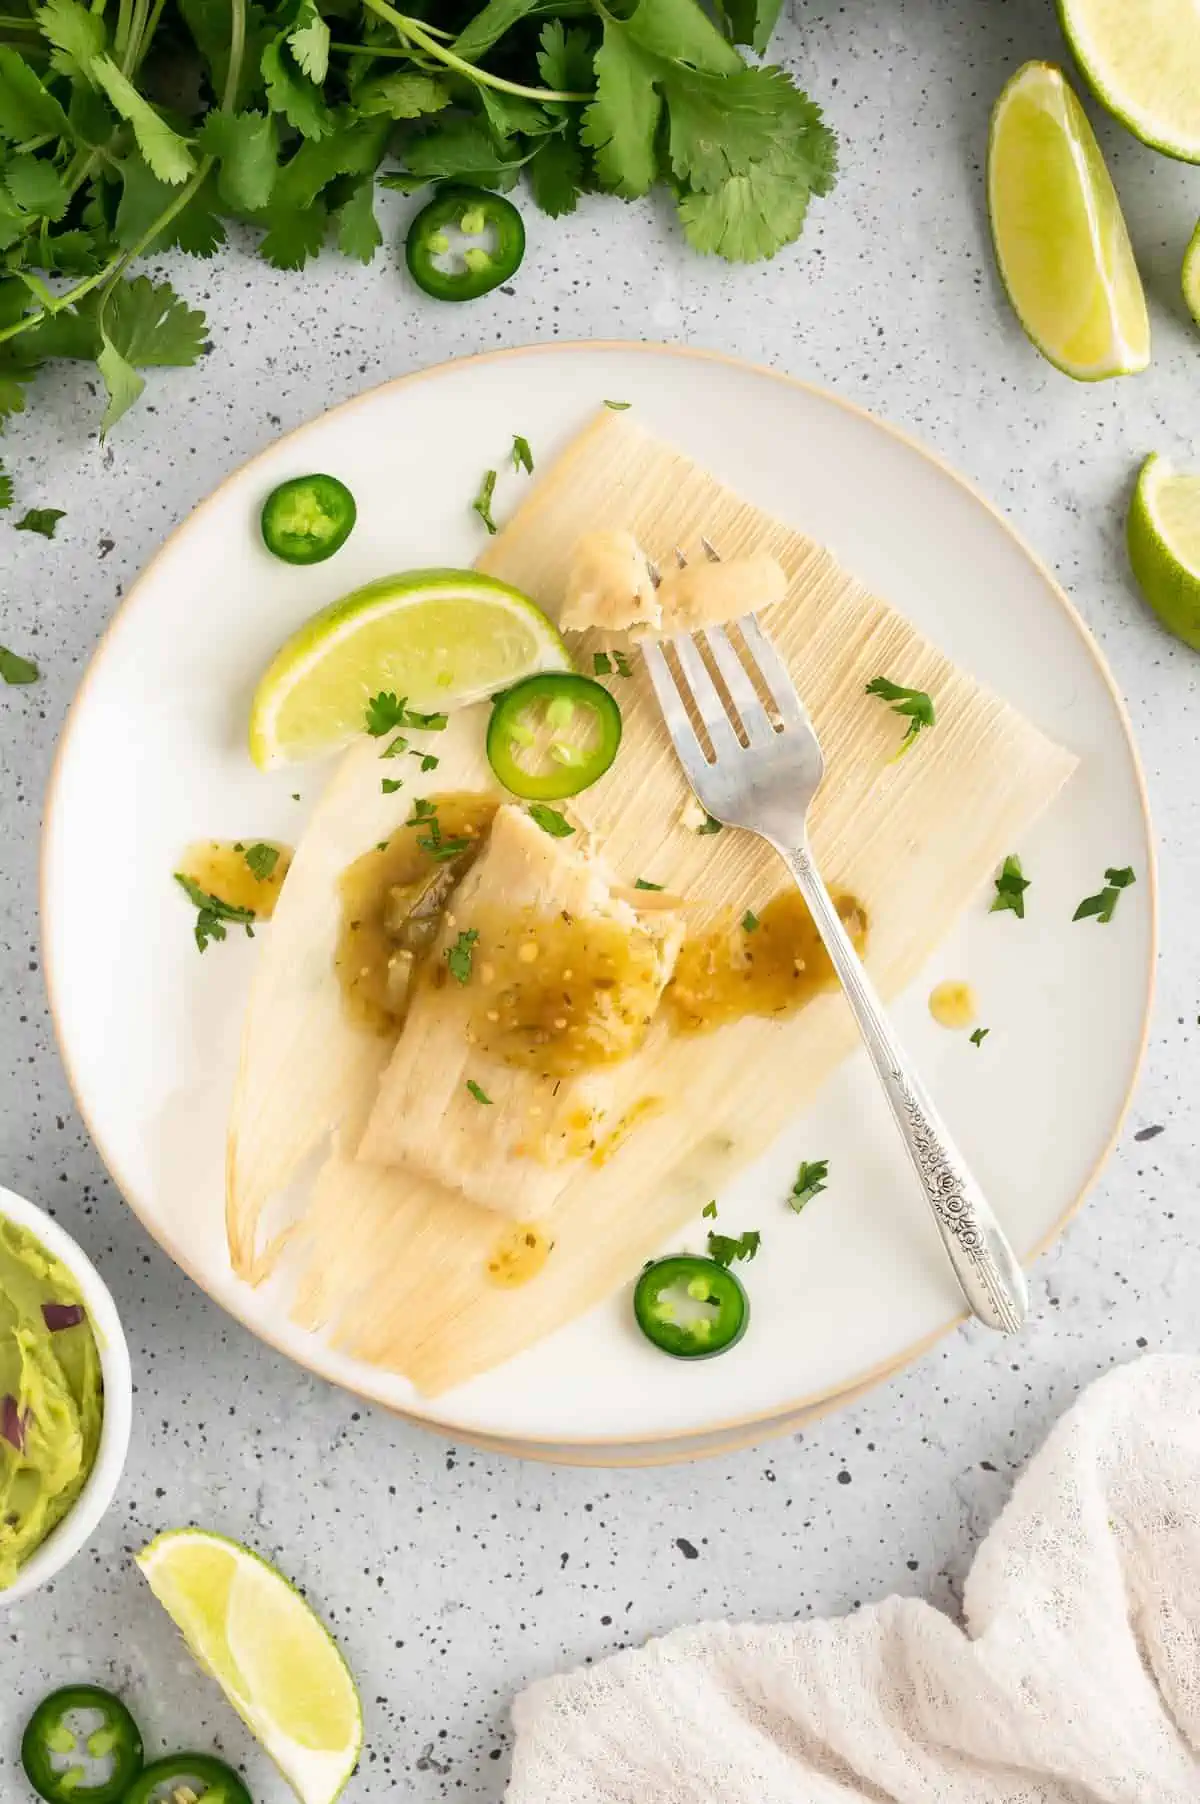 A vegan tamale on a plate, with garnish.